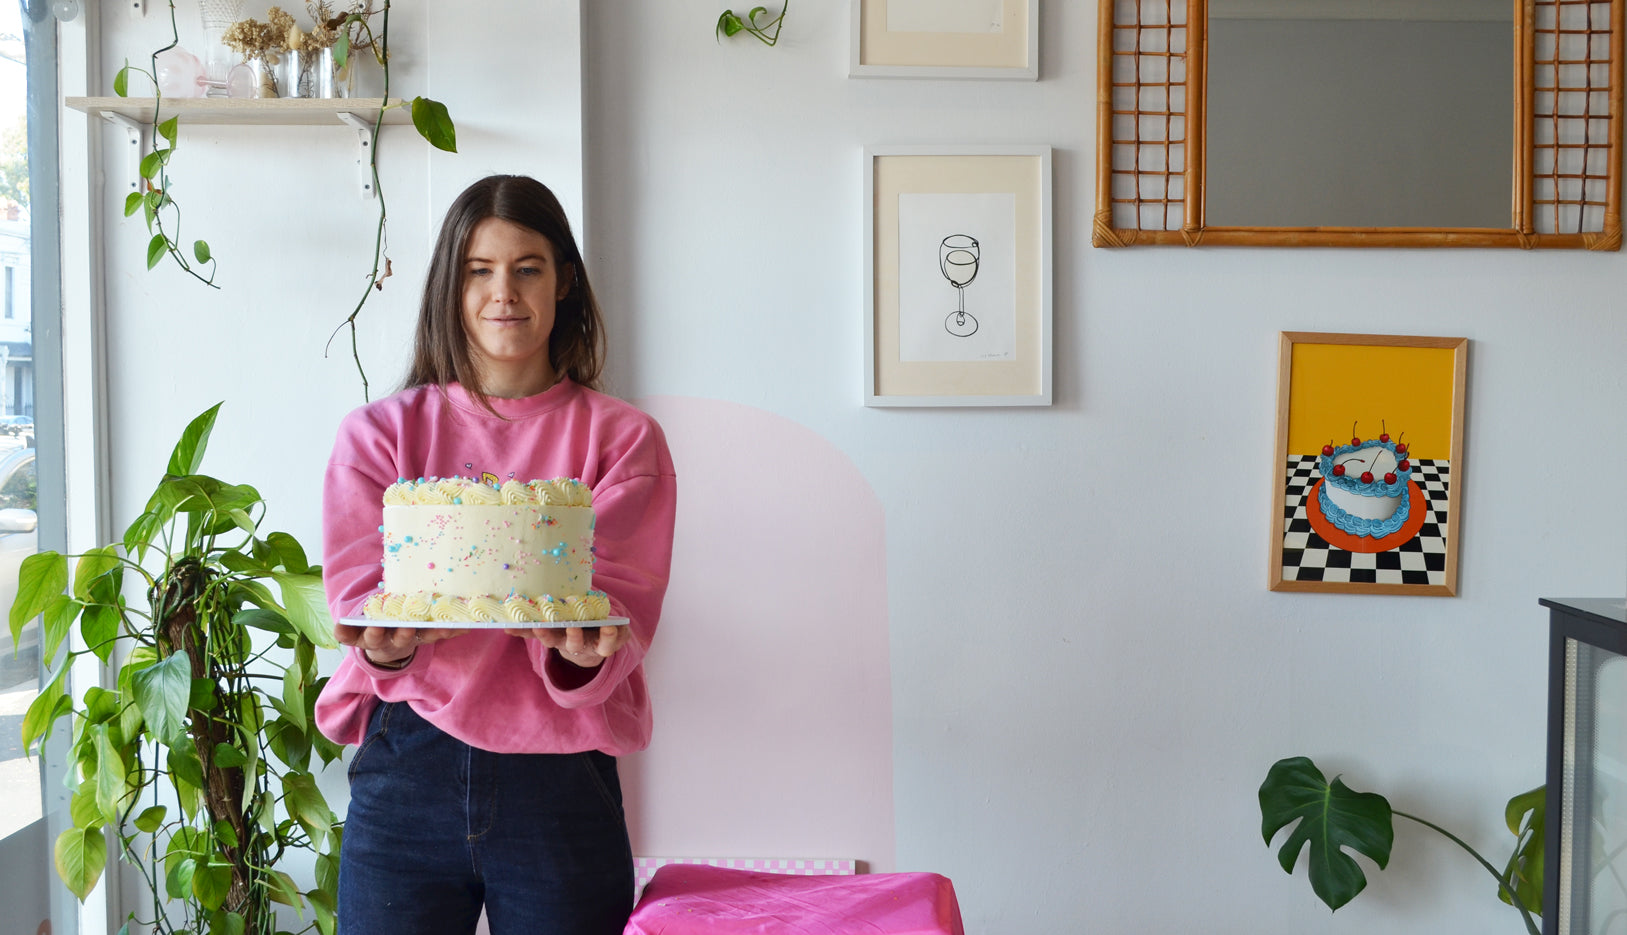 Matilda Chambers wearing a pink jumper holding a cream cake covered in sprinkles. A green plant sits in the background with prints on the wall behind her.